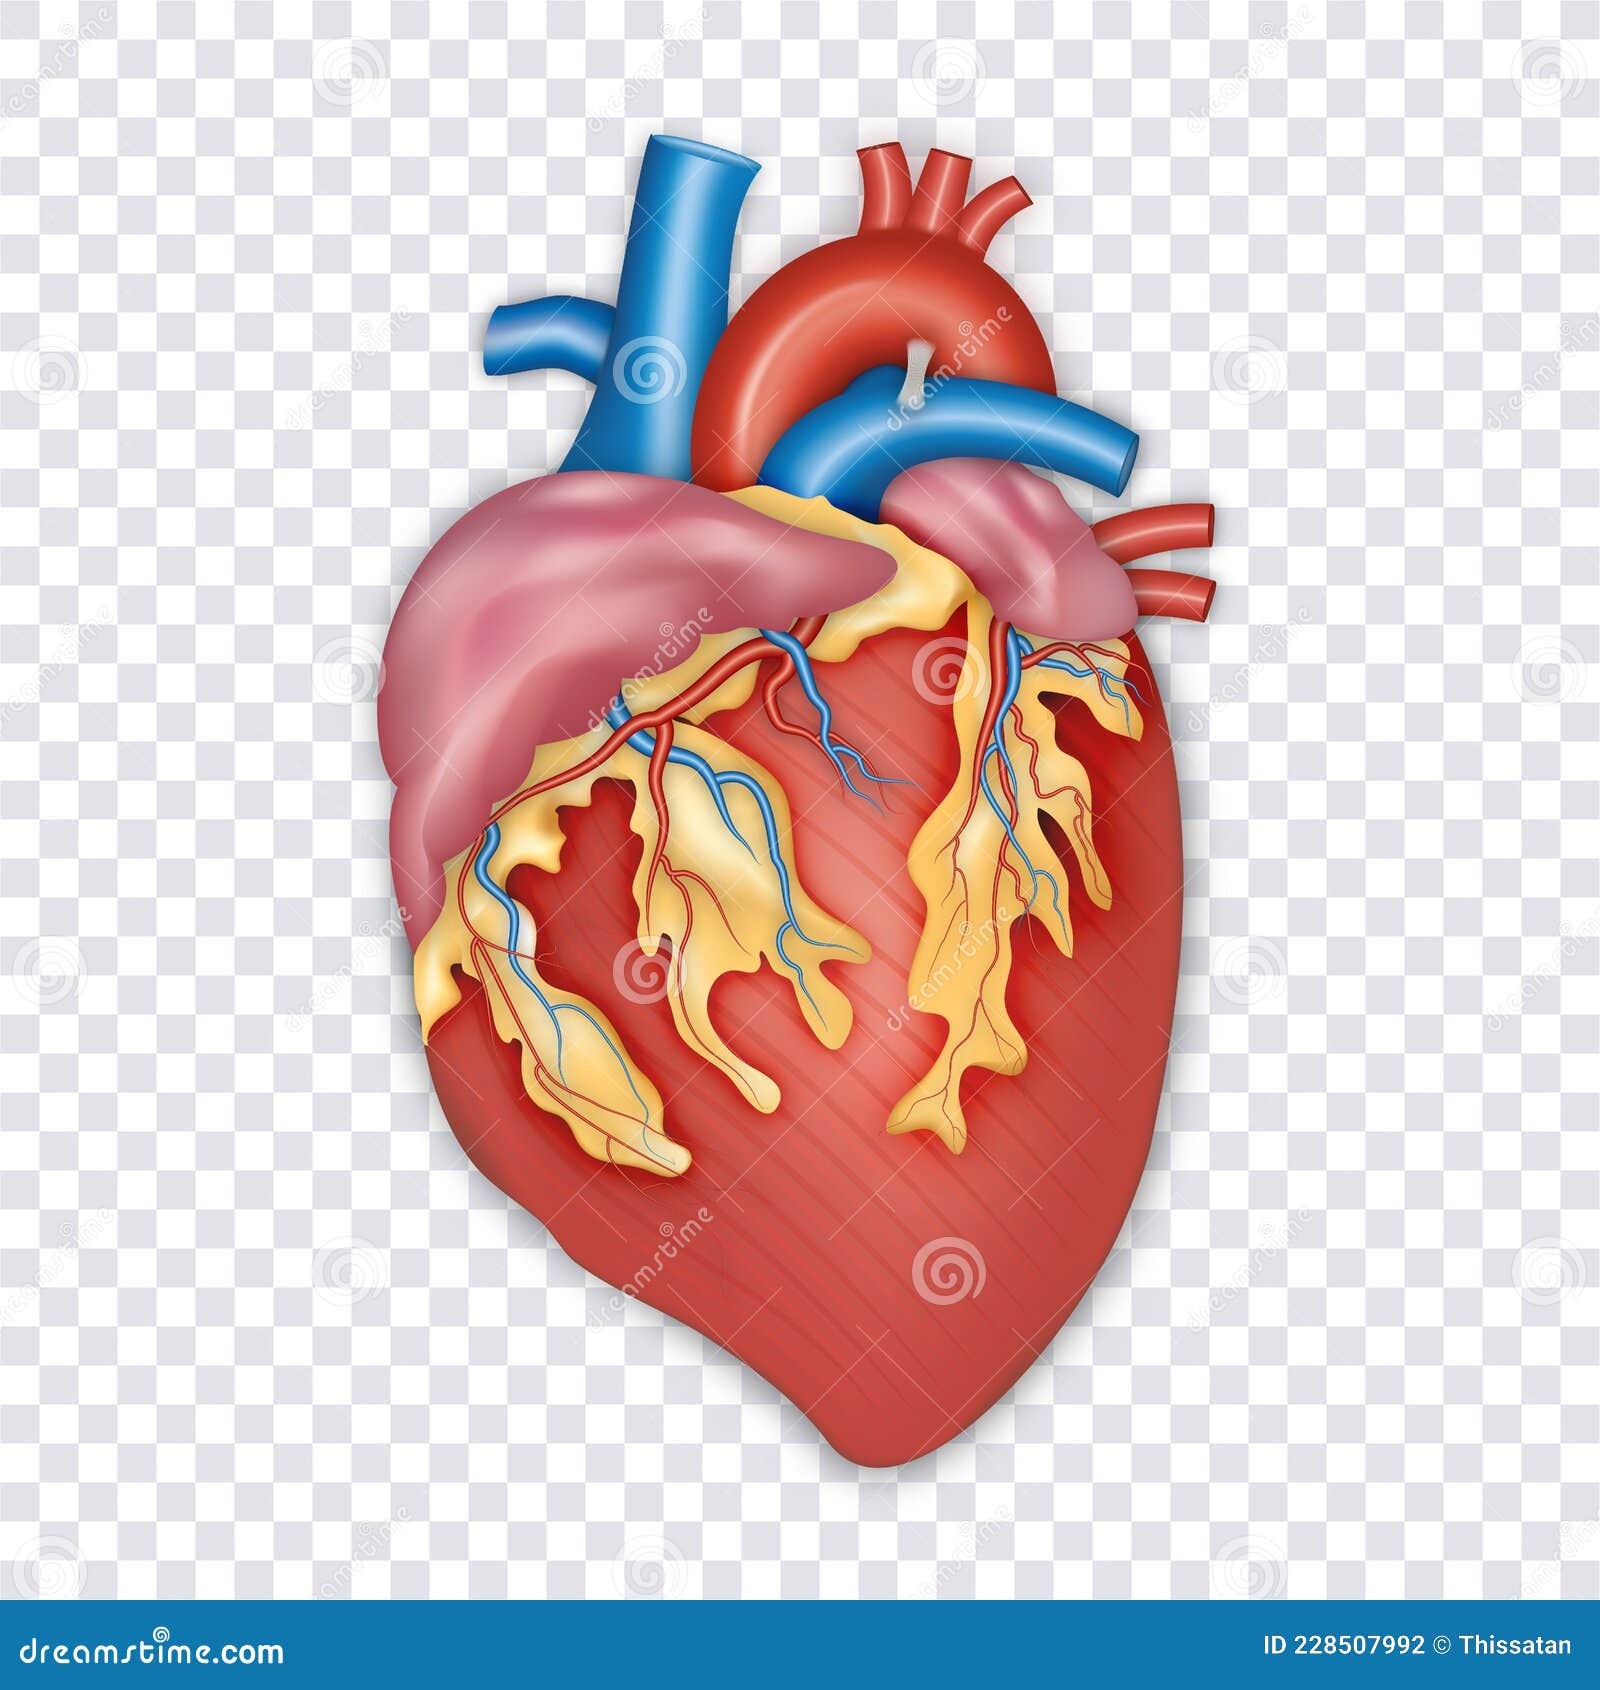 Diagram of Human Heart Anatomy Isolated on Transparent Background. Vector  Illustration Stock Illustration - Illustration of anatomy, blood: 228507992